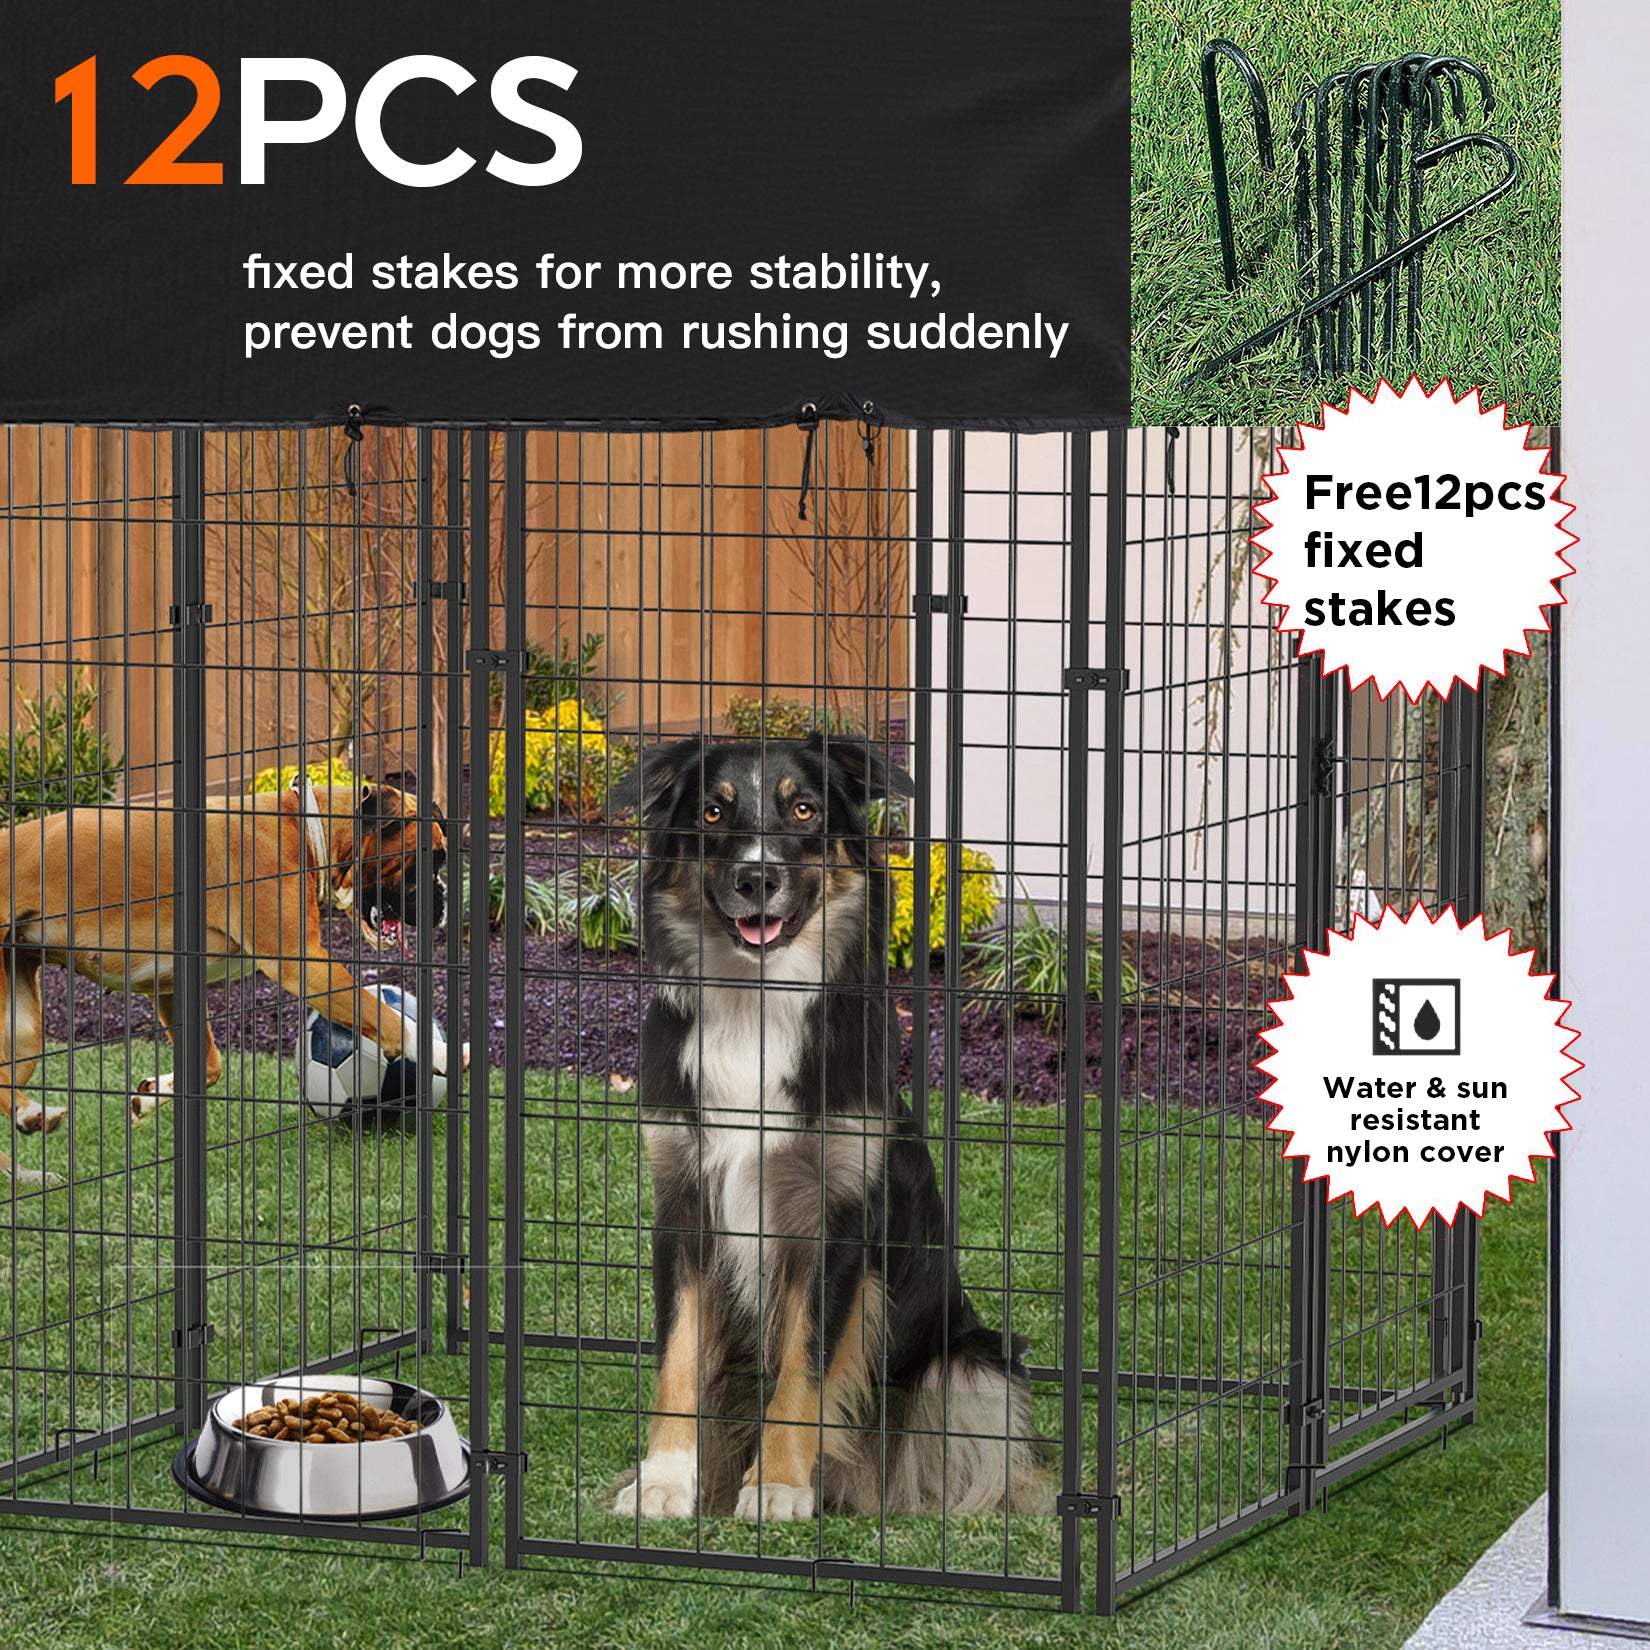 DII X-Large Gray Stripe Cage Mat - 25x39-in - Non-Slip Back - Machine  Washable - Pet Kennel & Crate Accessories - Dog/Cat - Extra Large